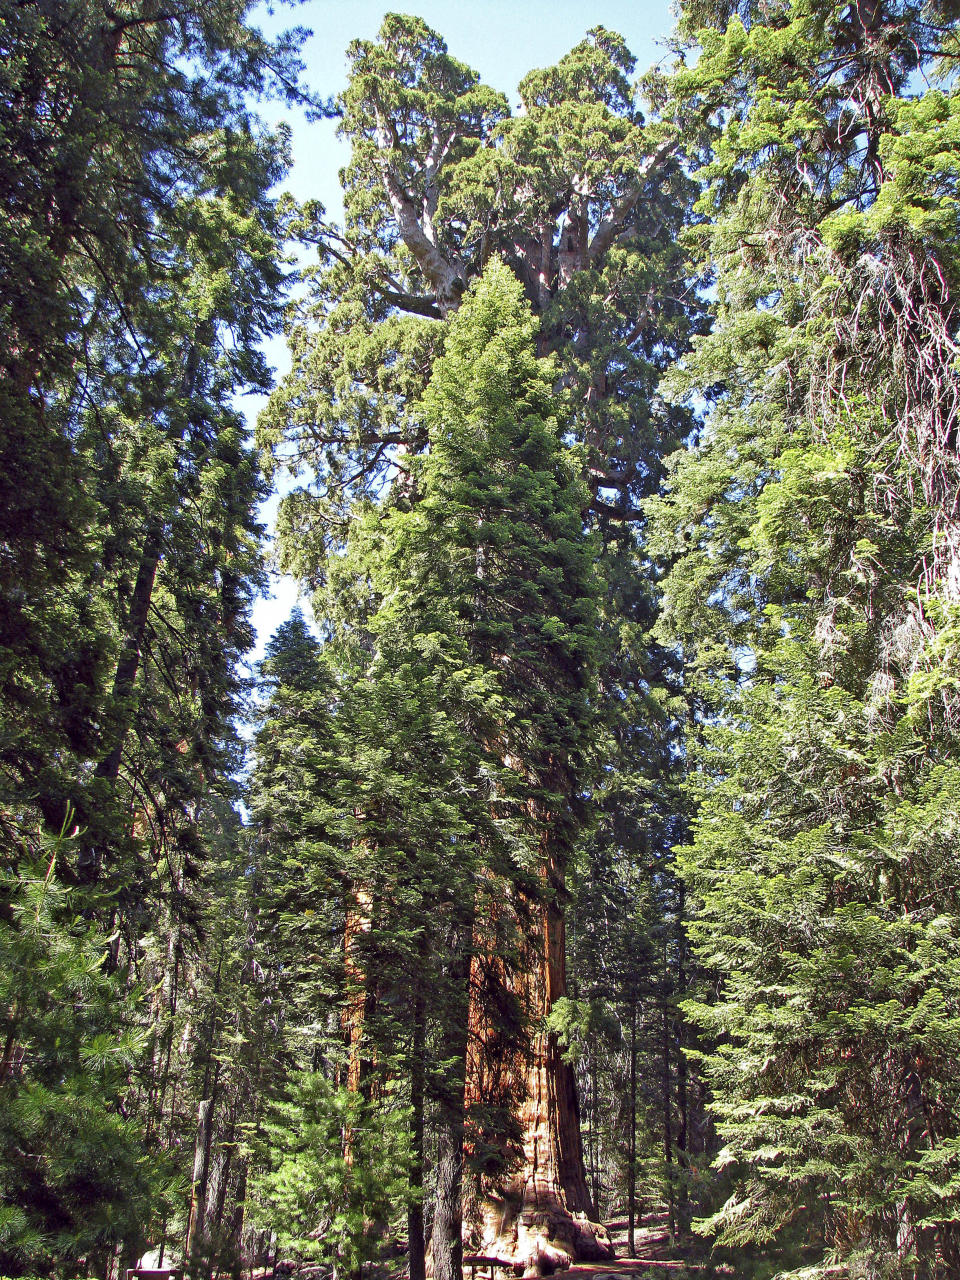 In this 2009 photo released by Steve Sillett, The President, a Giant Sequoia Tree, is shown in Sequoia National Park, Calif. After 3,240 years the Giant Sequoia is still growing wider at a consistent rate, which may be what most surprised the scientists examining how they and coastal redwoods will be impacted by climate change and whether they have a role to play in combatting it. (AP Photo/Steve Sillett)